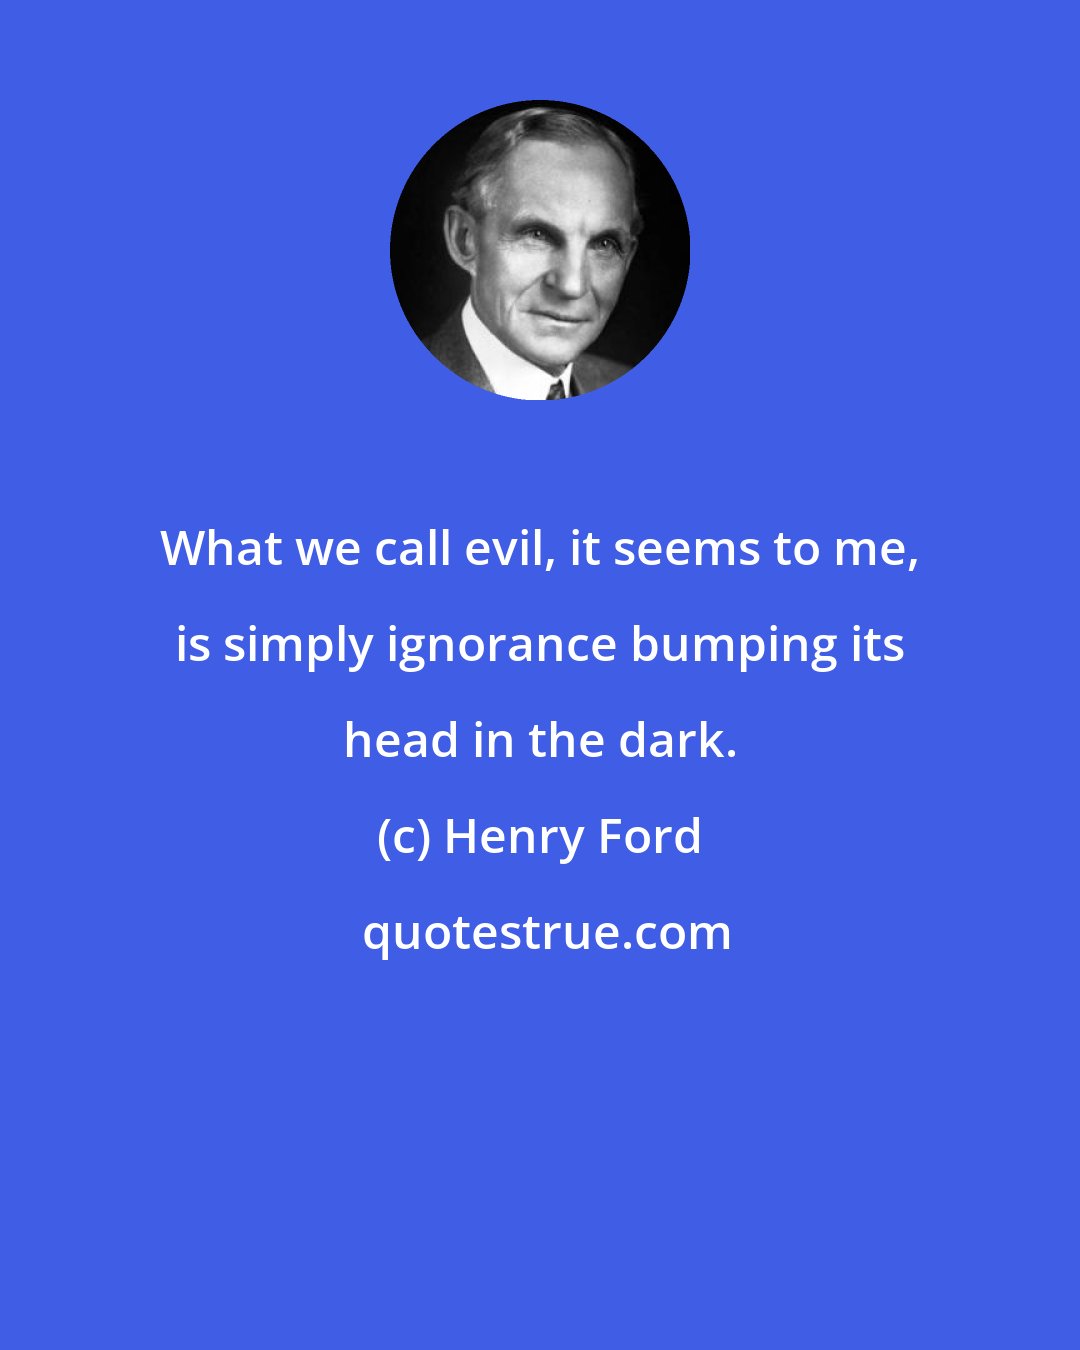 Henry Ford: What we call evil, it seems to me, is simply ignorance bumping its head in the dark.